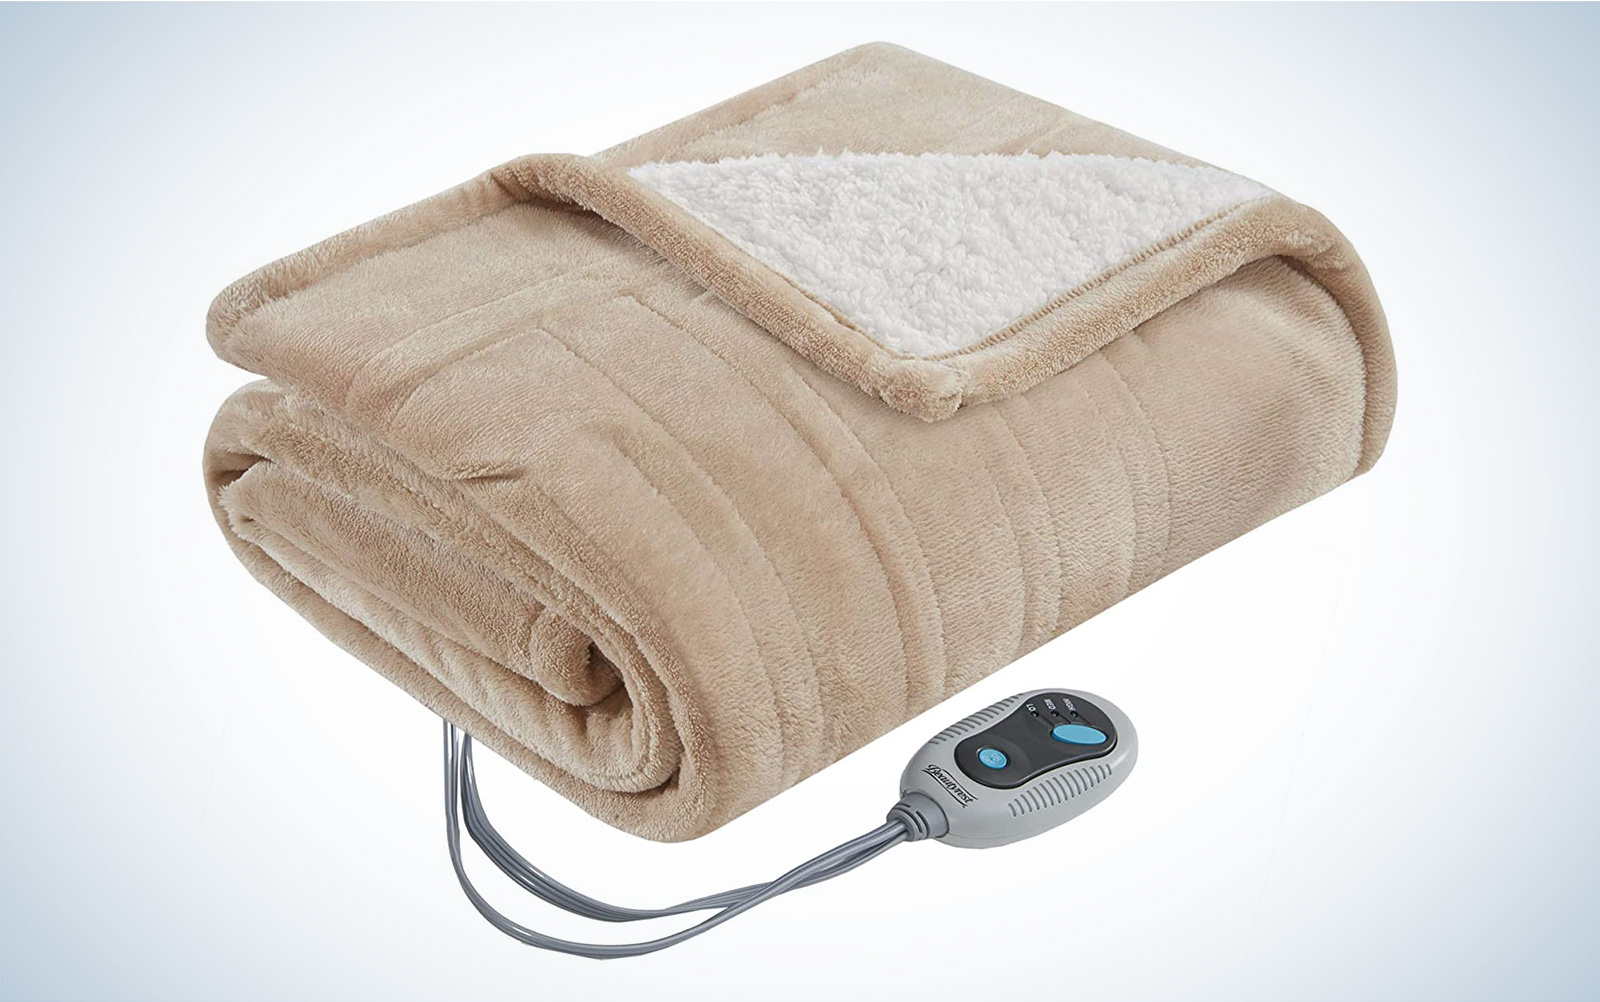 Beautyrest reversible heated blanket on a plain background as one of the best heated blankets